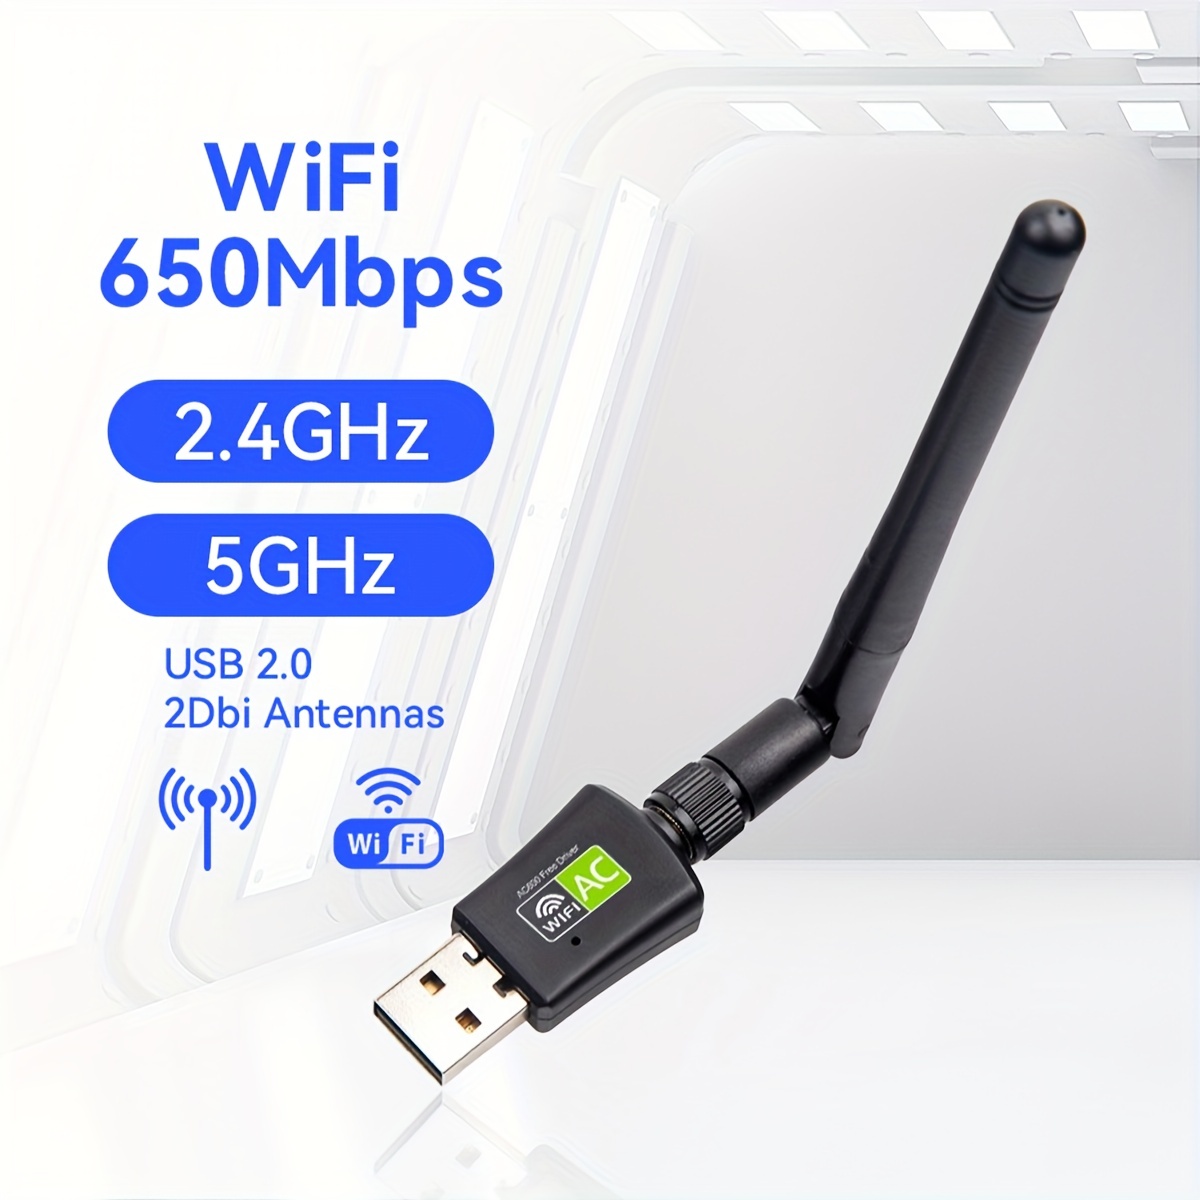  WiFi USB,Bluetooth USB Adapter,WiFi Bluetooth USB,USB WiFi  Adapter,Bluetooth WiFi 2in1,600Mbps 2.4/5.8Ghz Dual Band Wireless  Network,Plug and Play, for PC/Laptop/Desktop,Support Win7/8/8.1/10/Win 11 :  Electronics